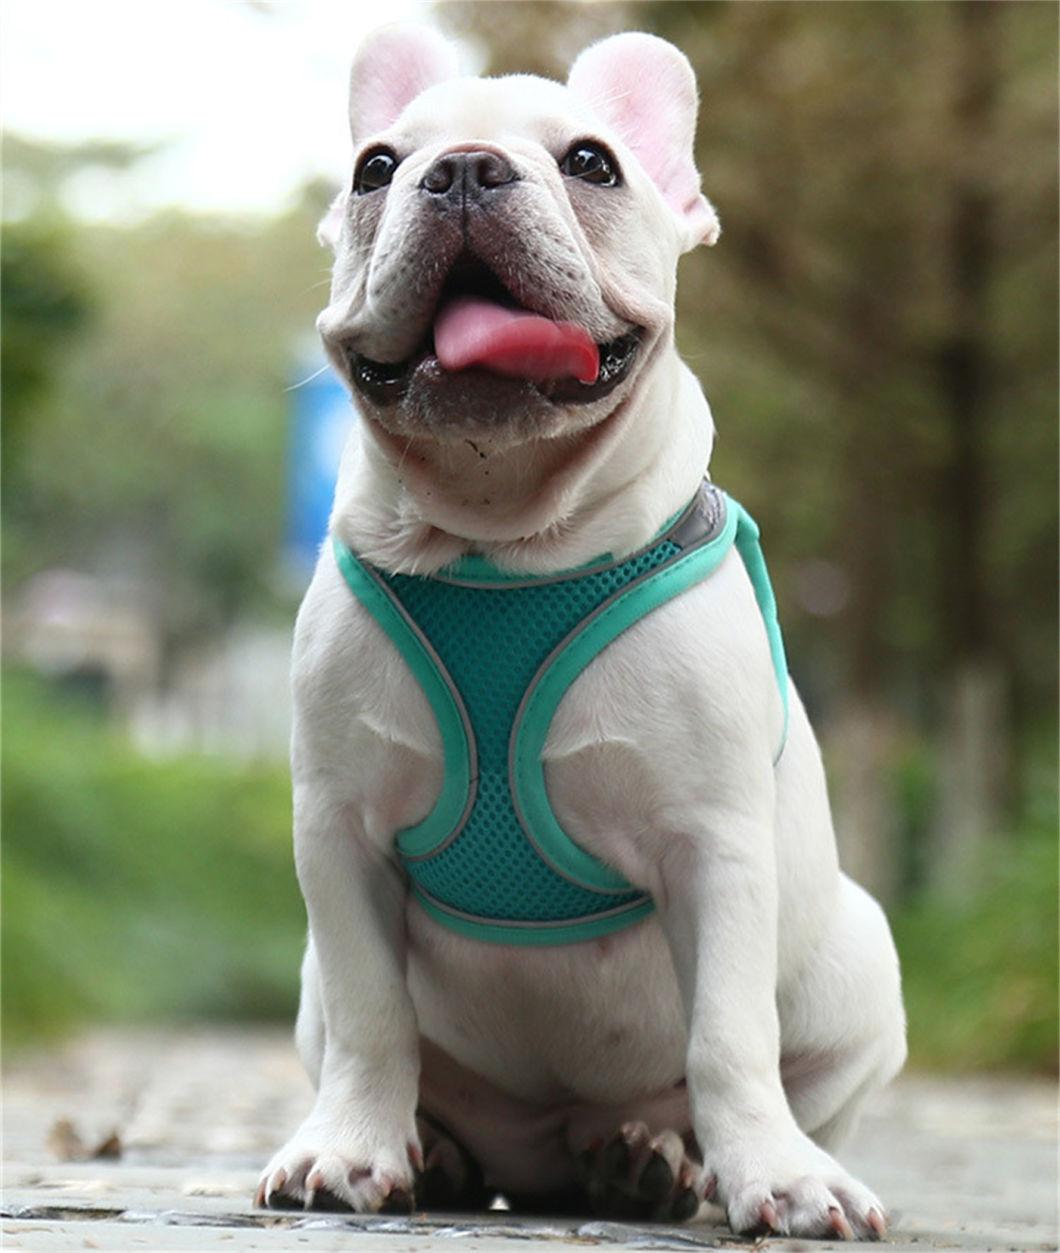 Dog Cat Harness Vest with Walking Lead Leash